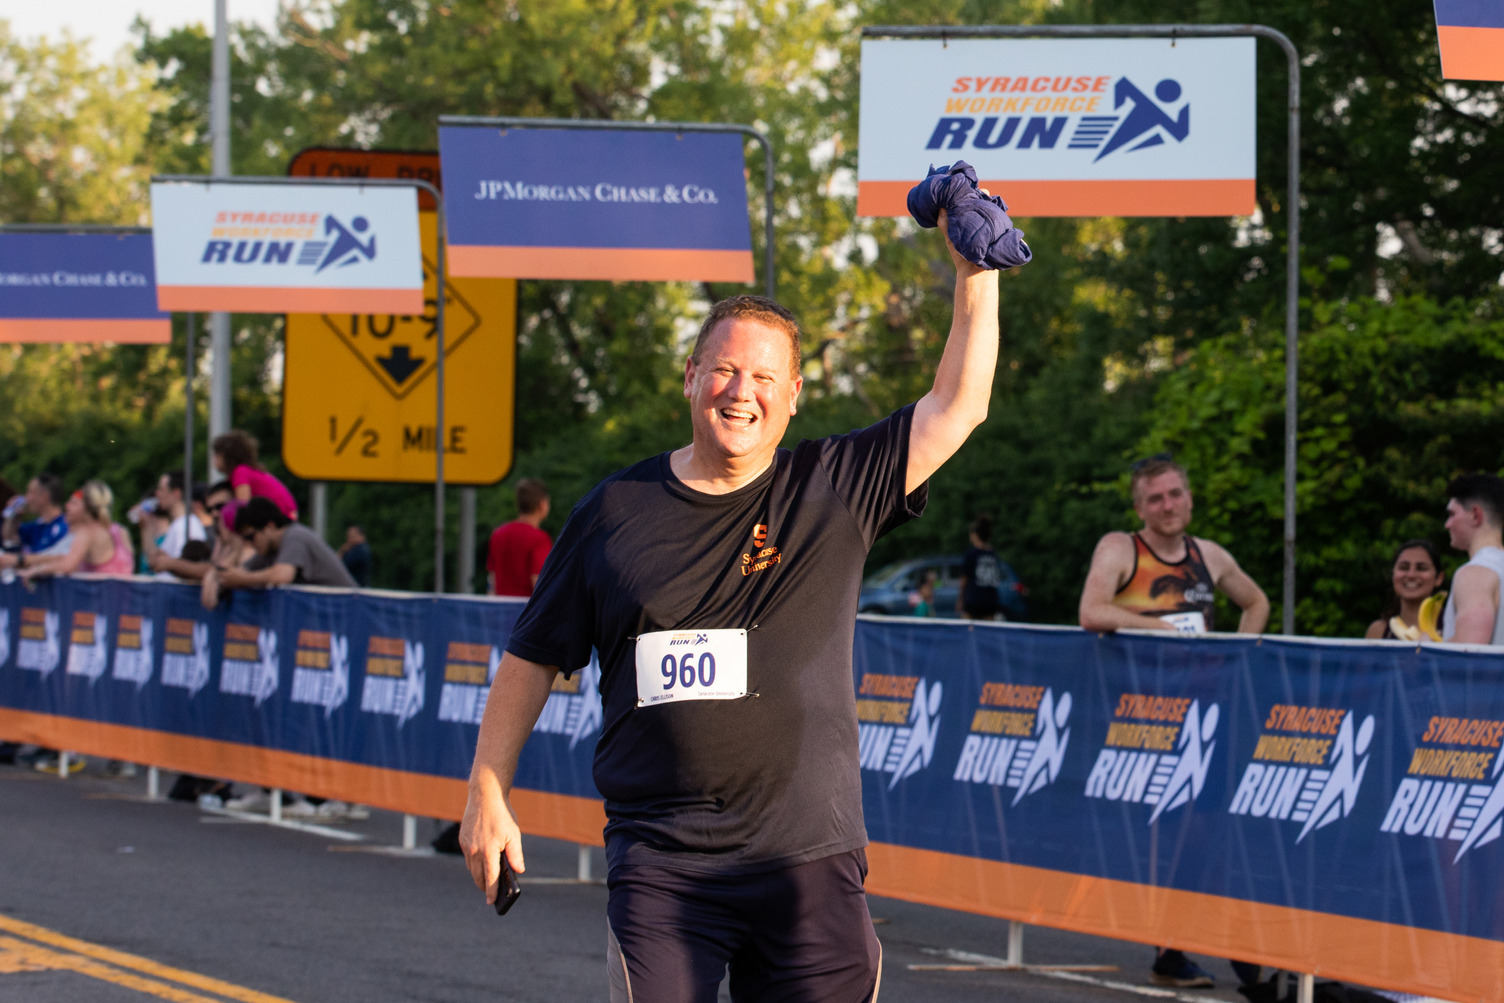 Chris Ellison gives a fist pump on the course at the Syracuse Workforce Run